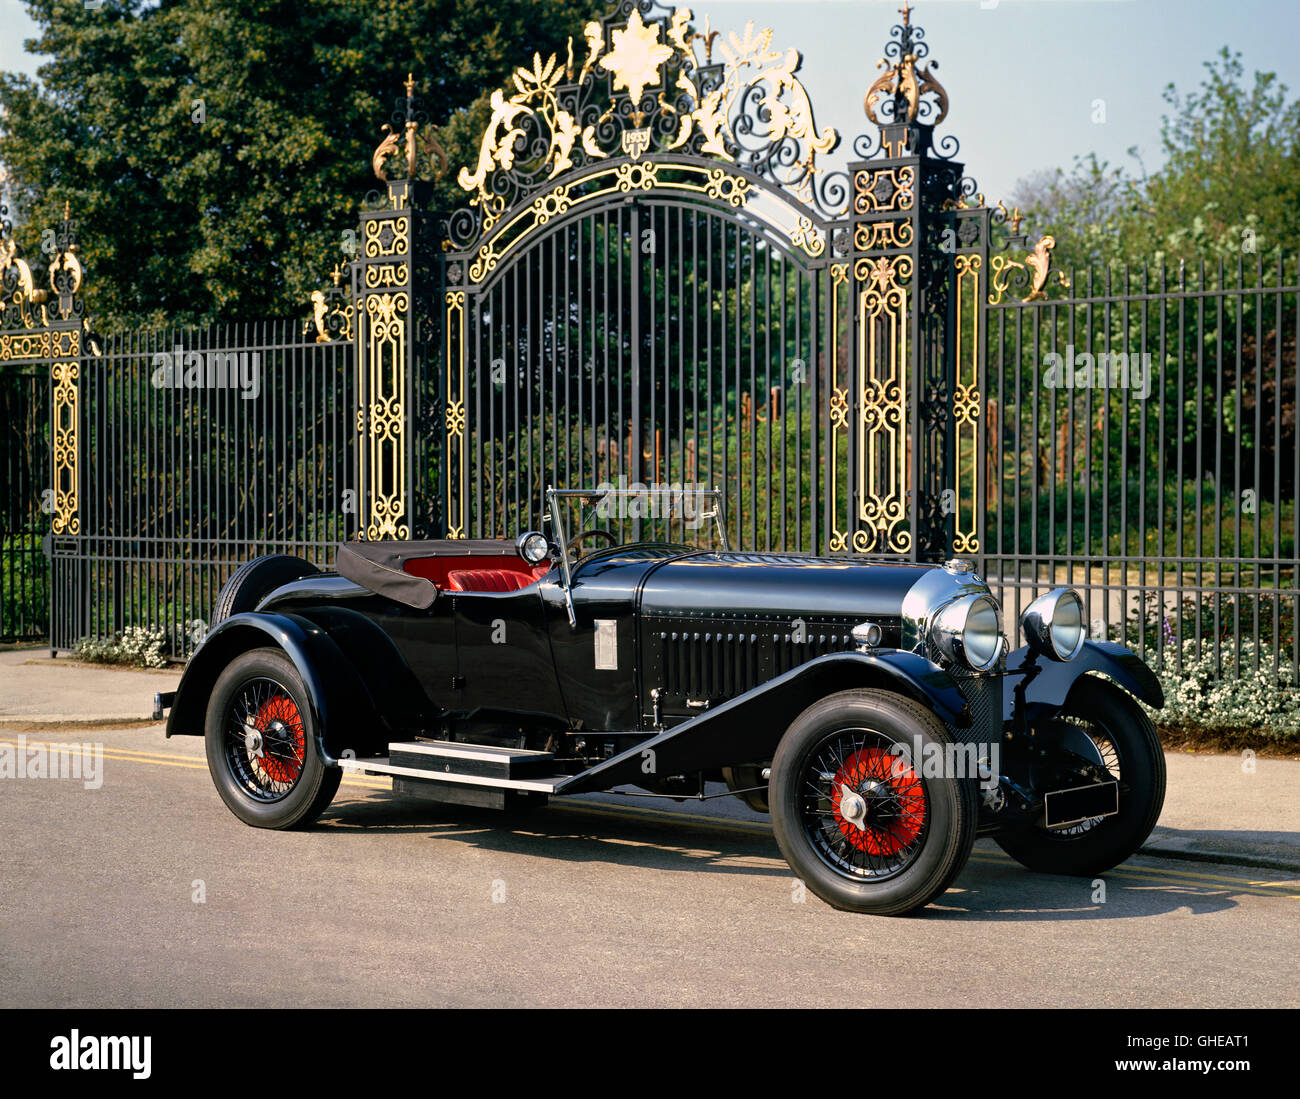 1929 Bentley 4.5 litre drophead coupe with dickey Country of origin United Kingdom Stock Photo